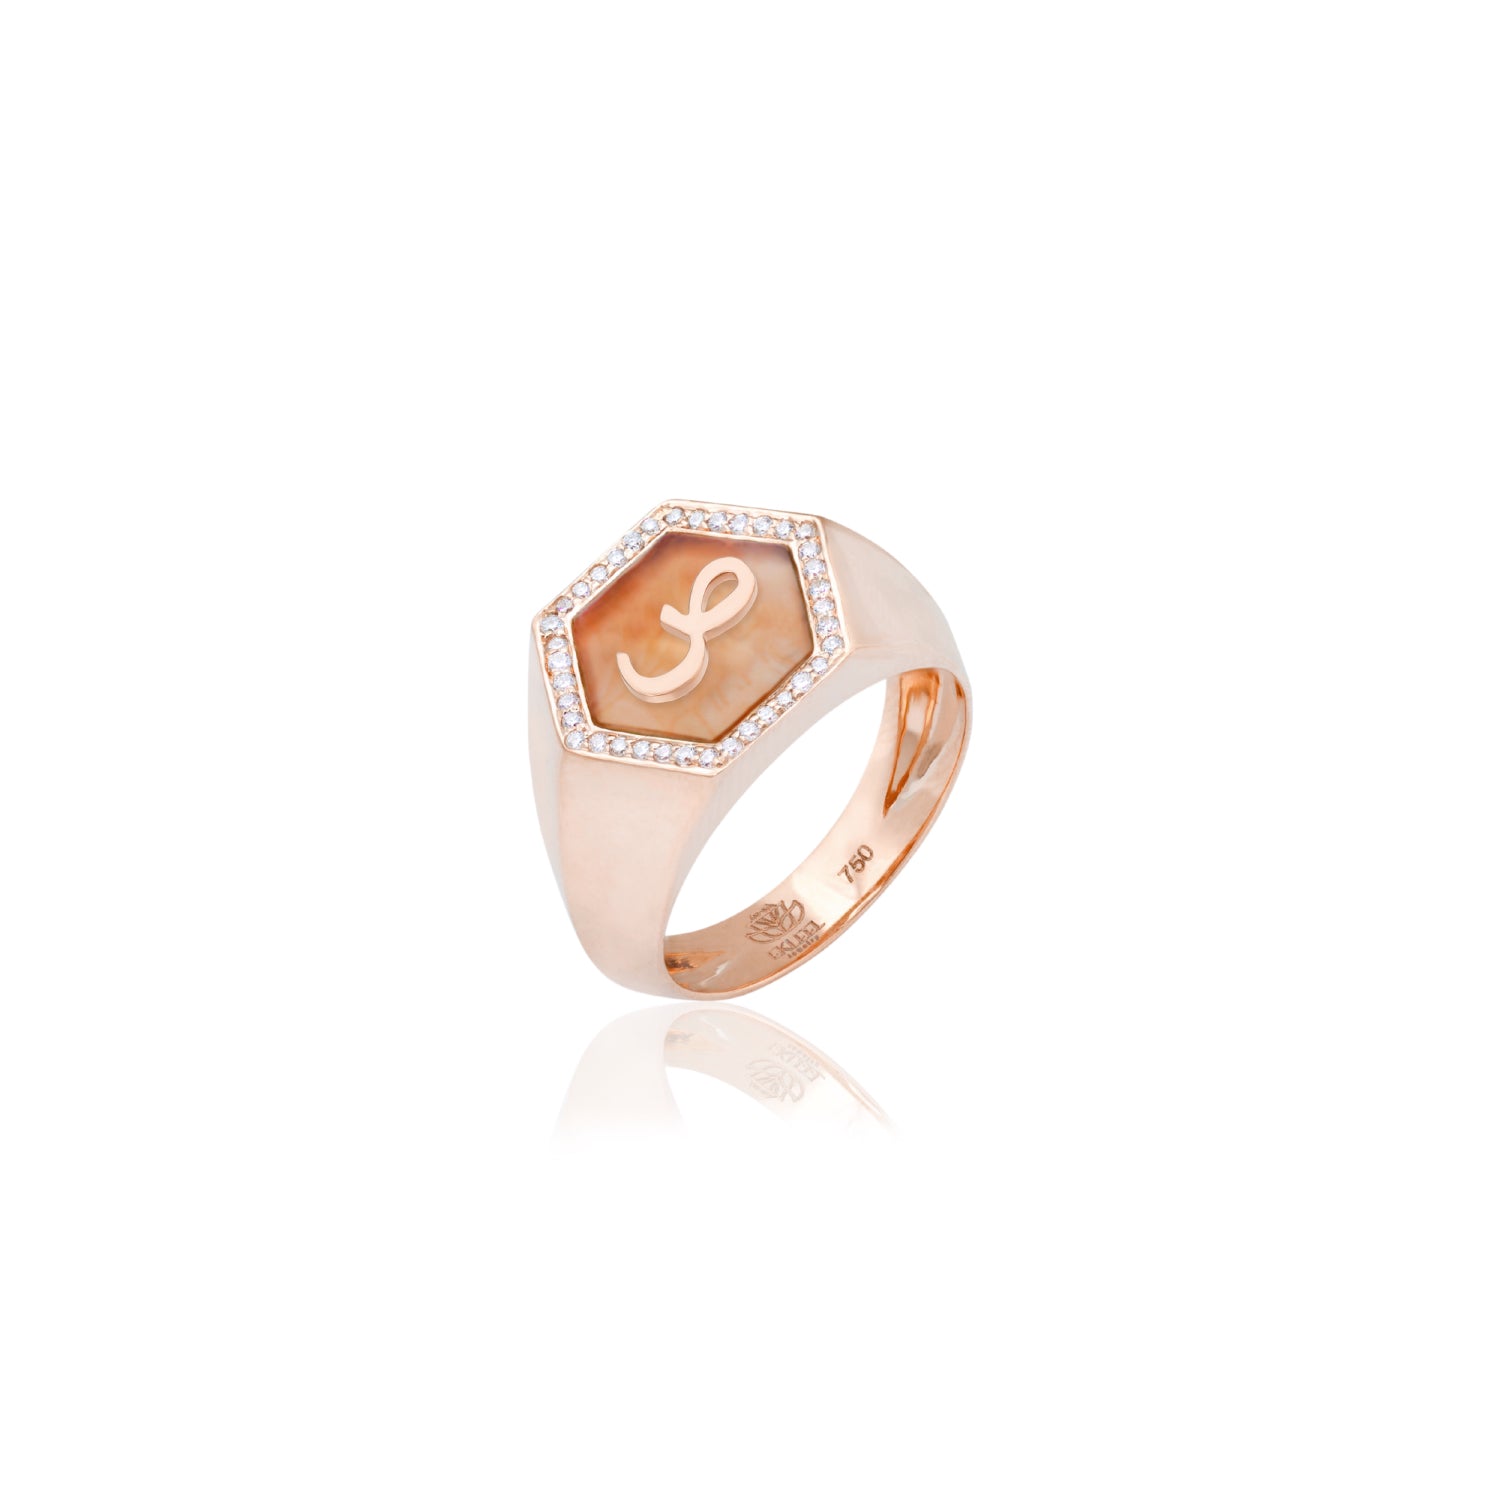 Qamoos 2.0 Letter ص Carnelian and Diamond Signet Ring in Rose Gold